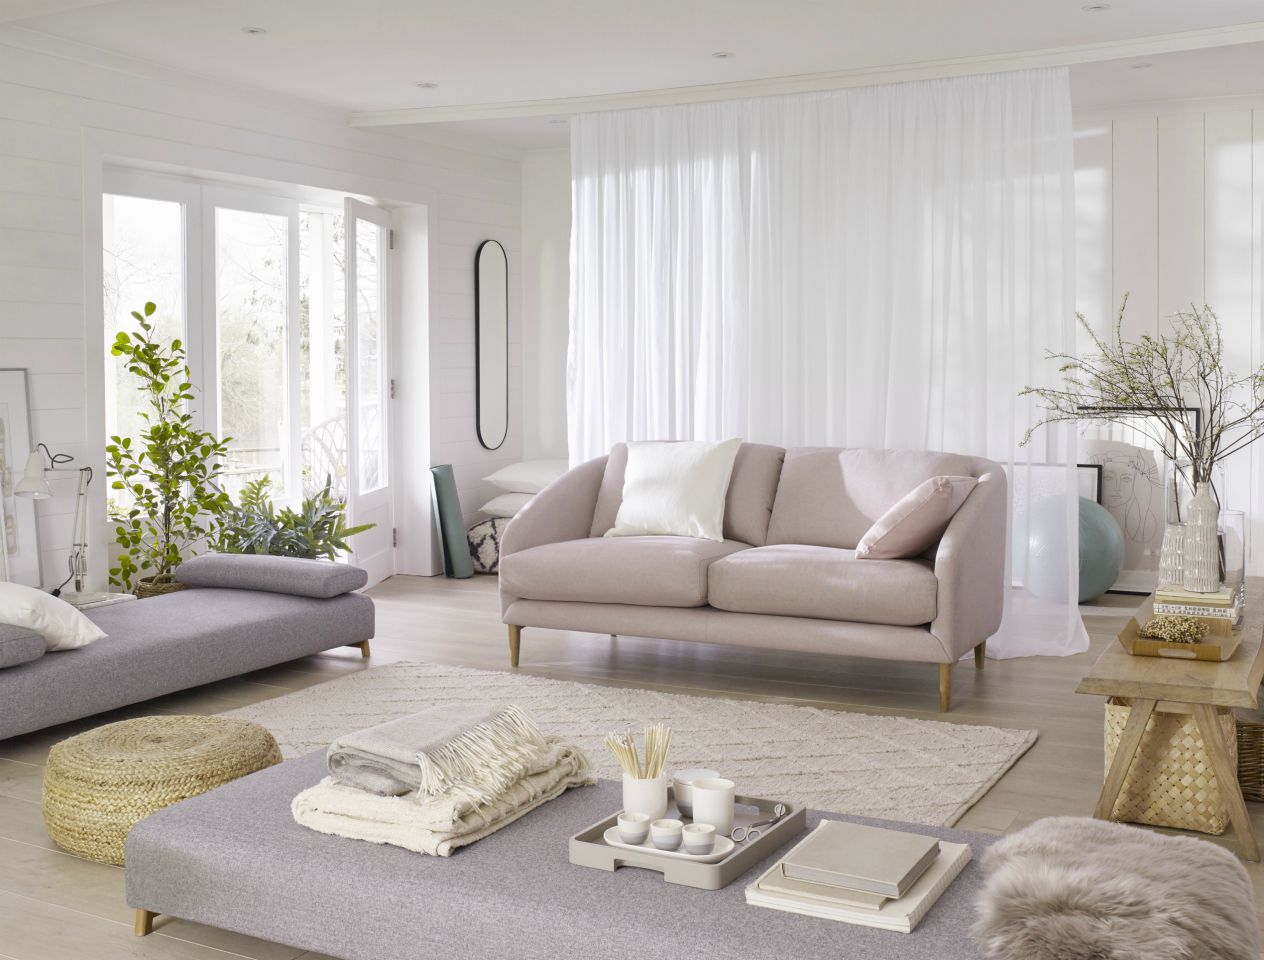 How to turn your living room into a real-life retreat